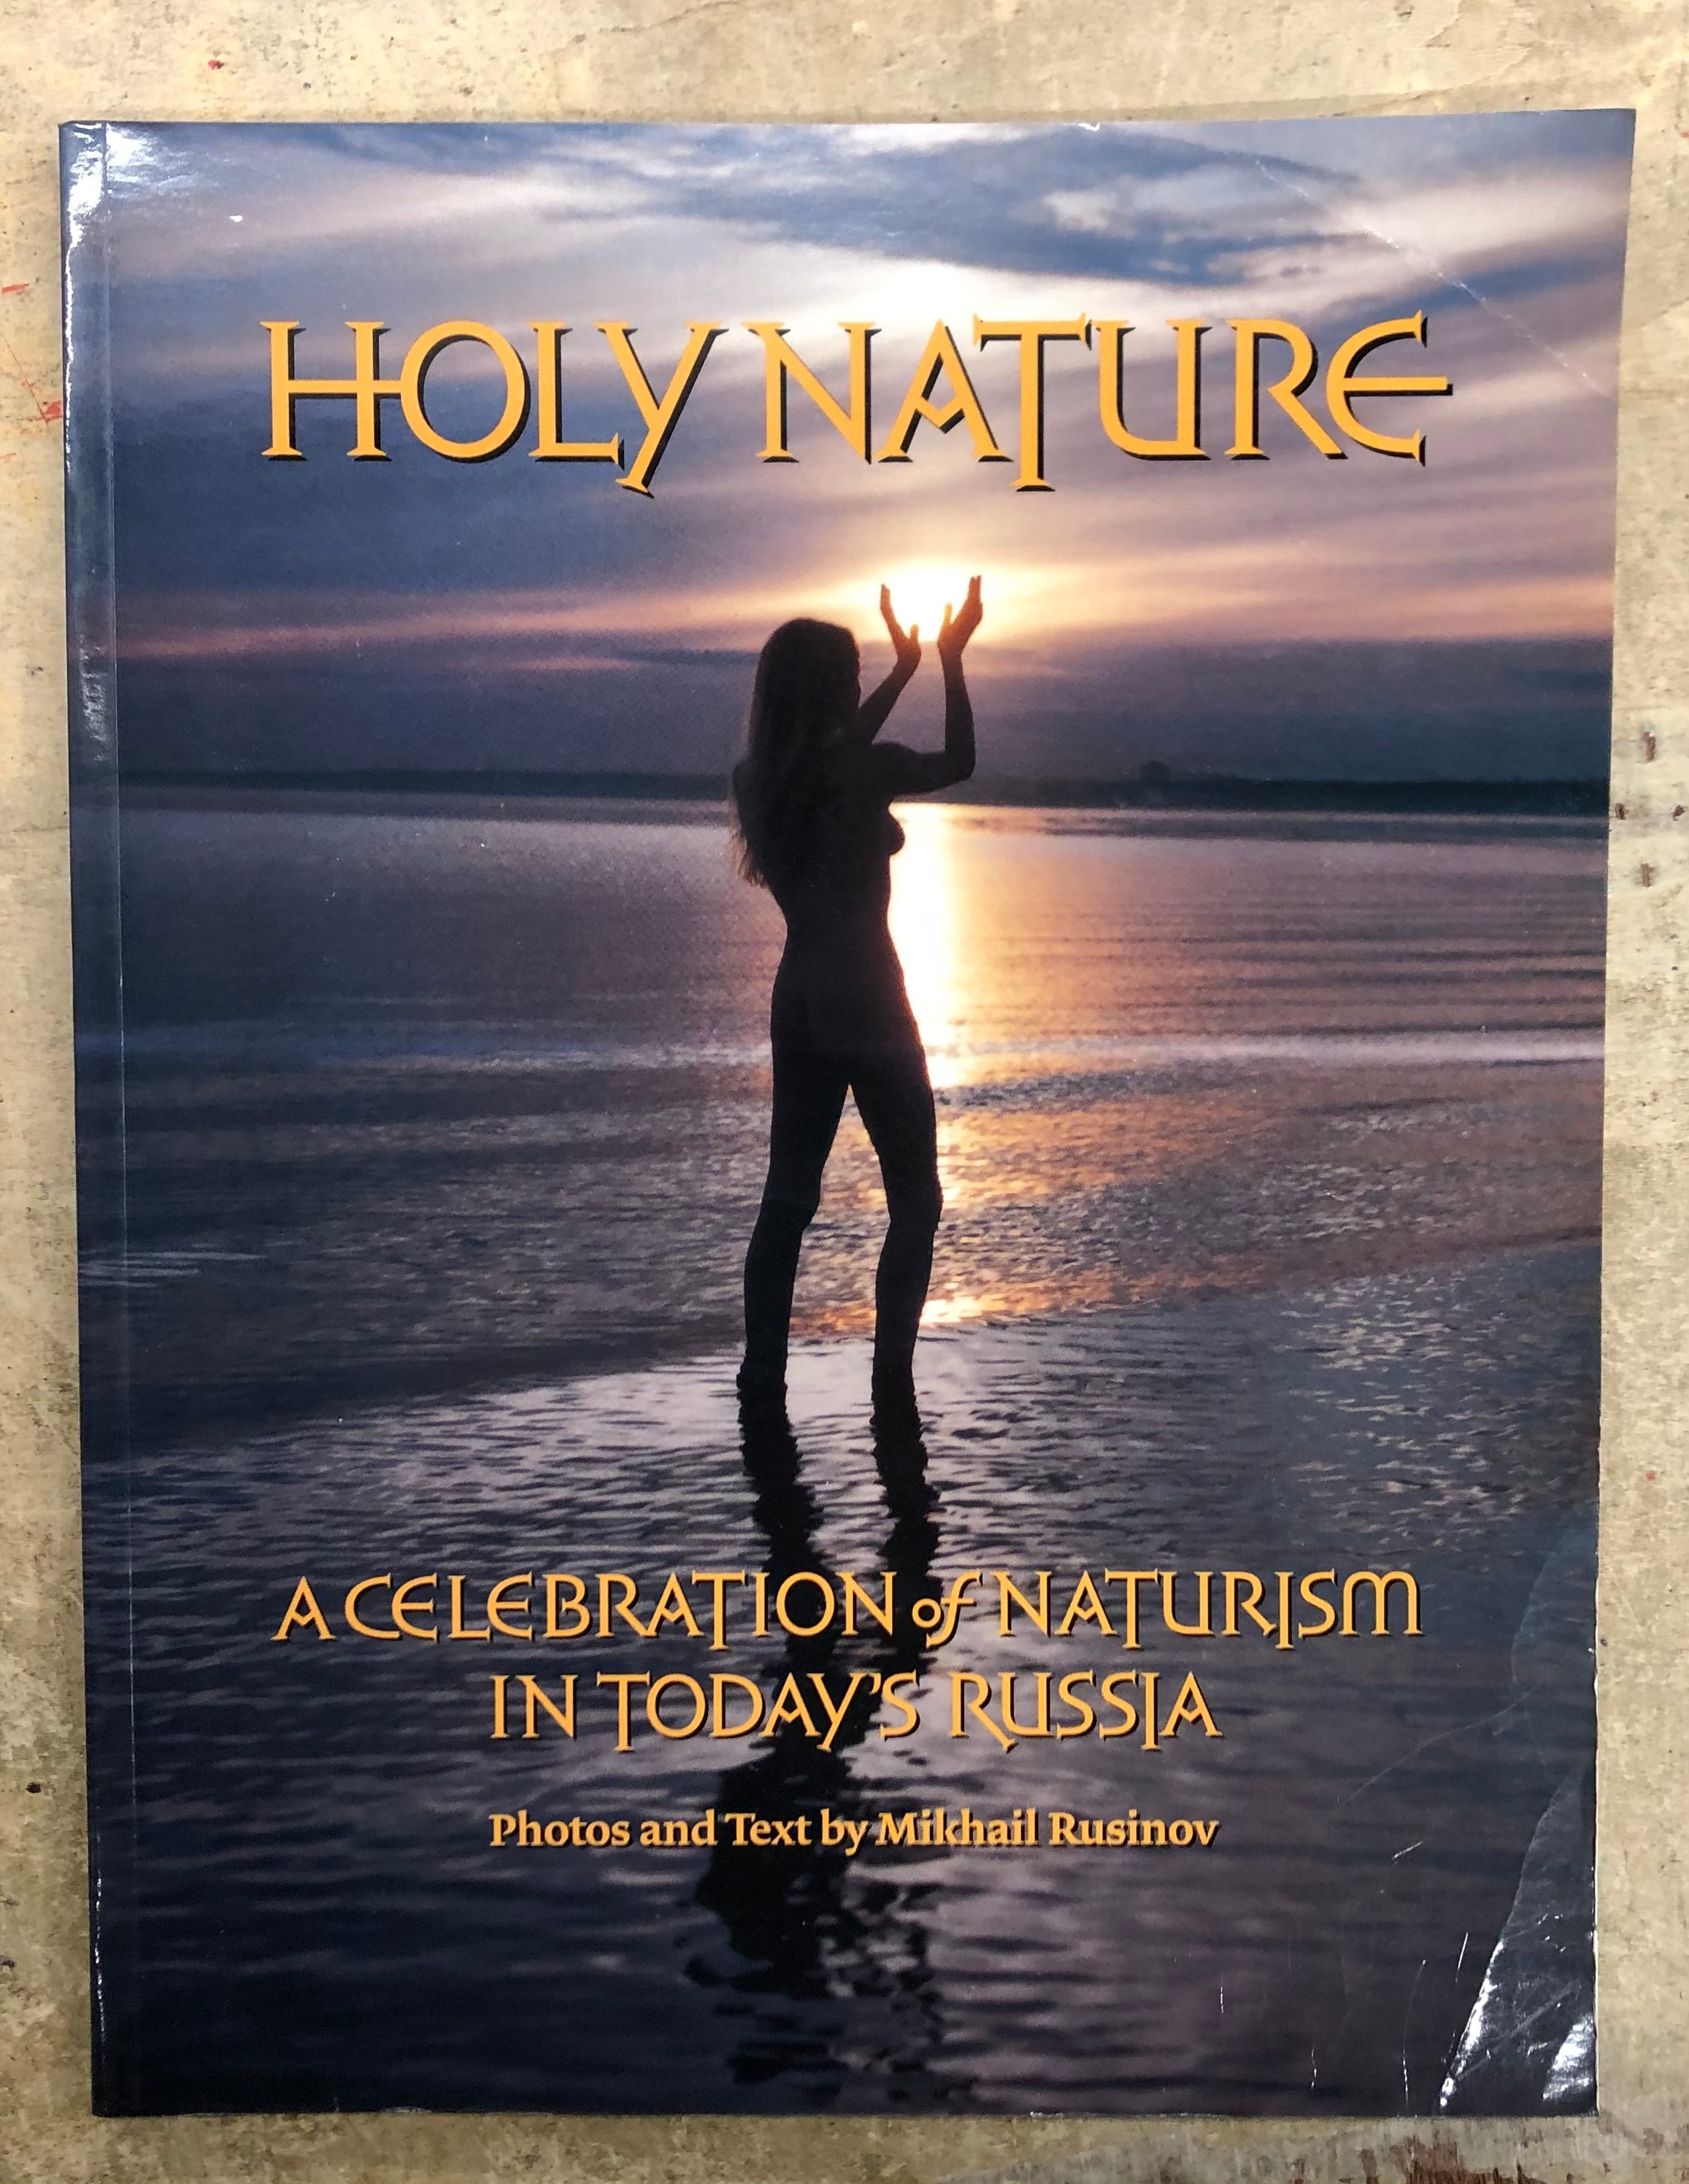 Gary Holy Nature: A Celebration of Naturism Today's Russia | Mandarake Online Shop